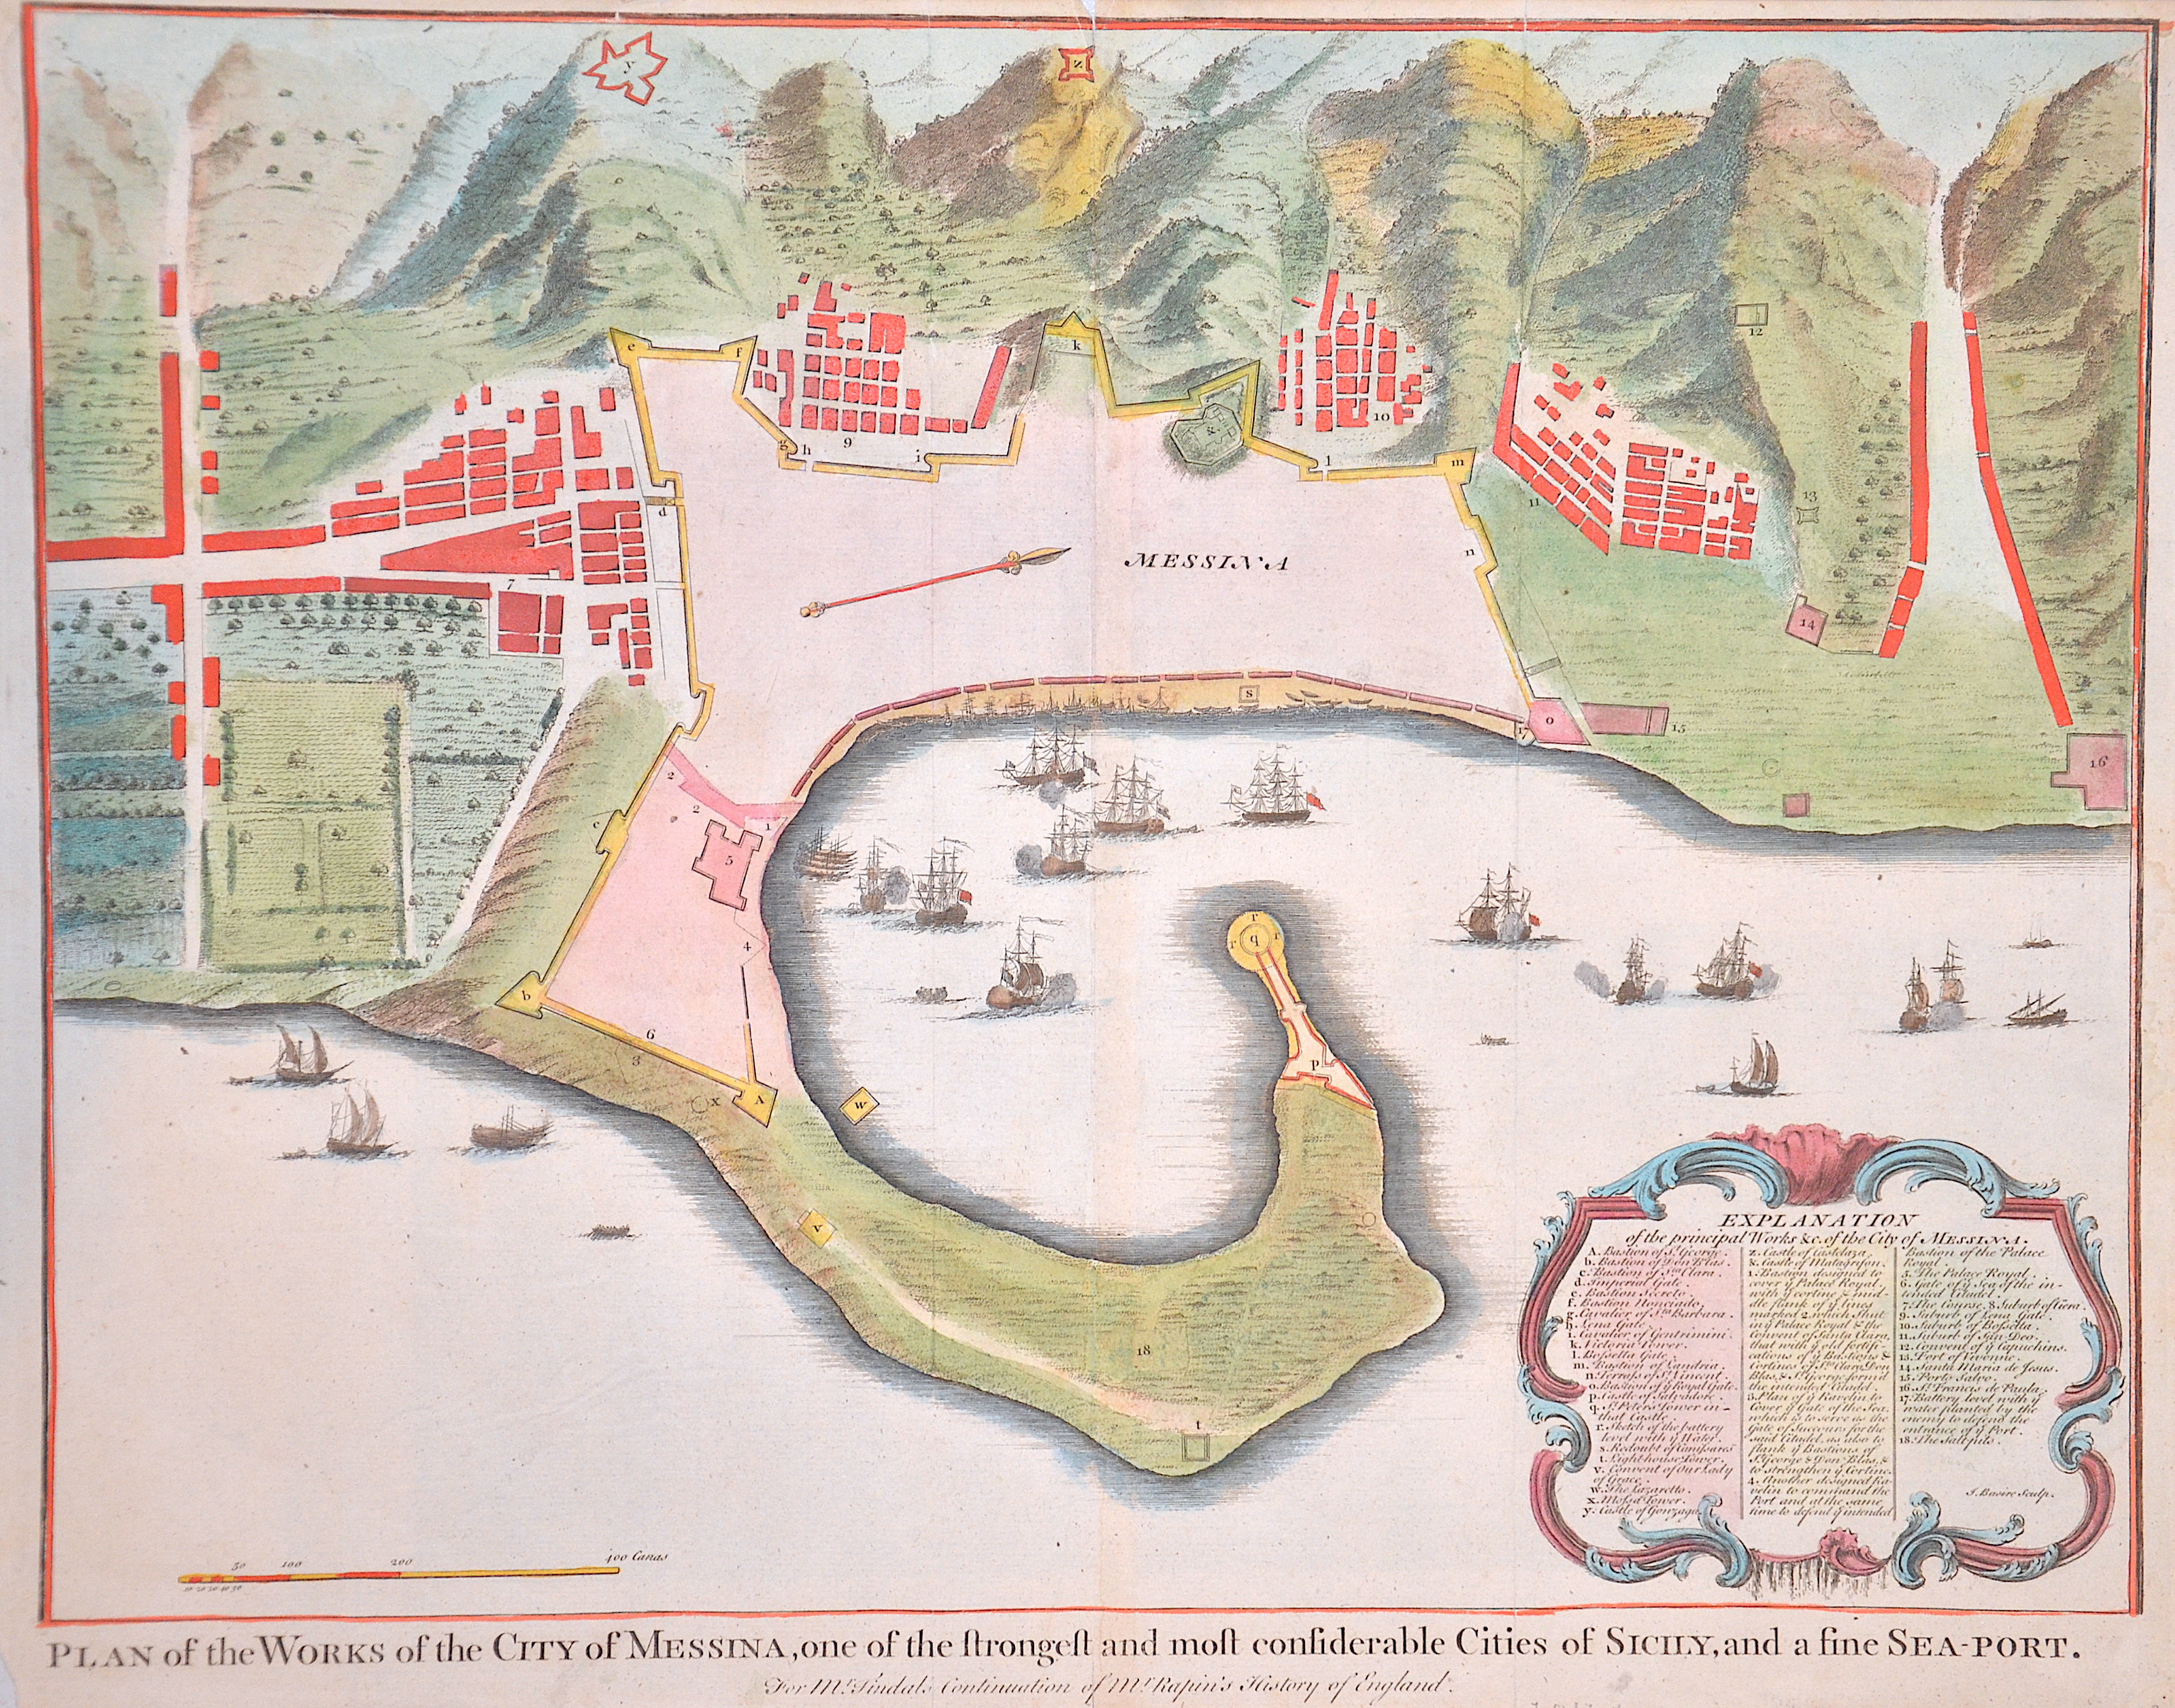 Rapin de Thoyras  Plan of the Works of the city of Messina, one of the strongest and most confiderable Cities of Sicily, and a fine sea- port